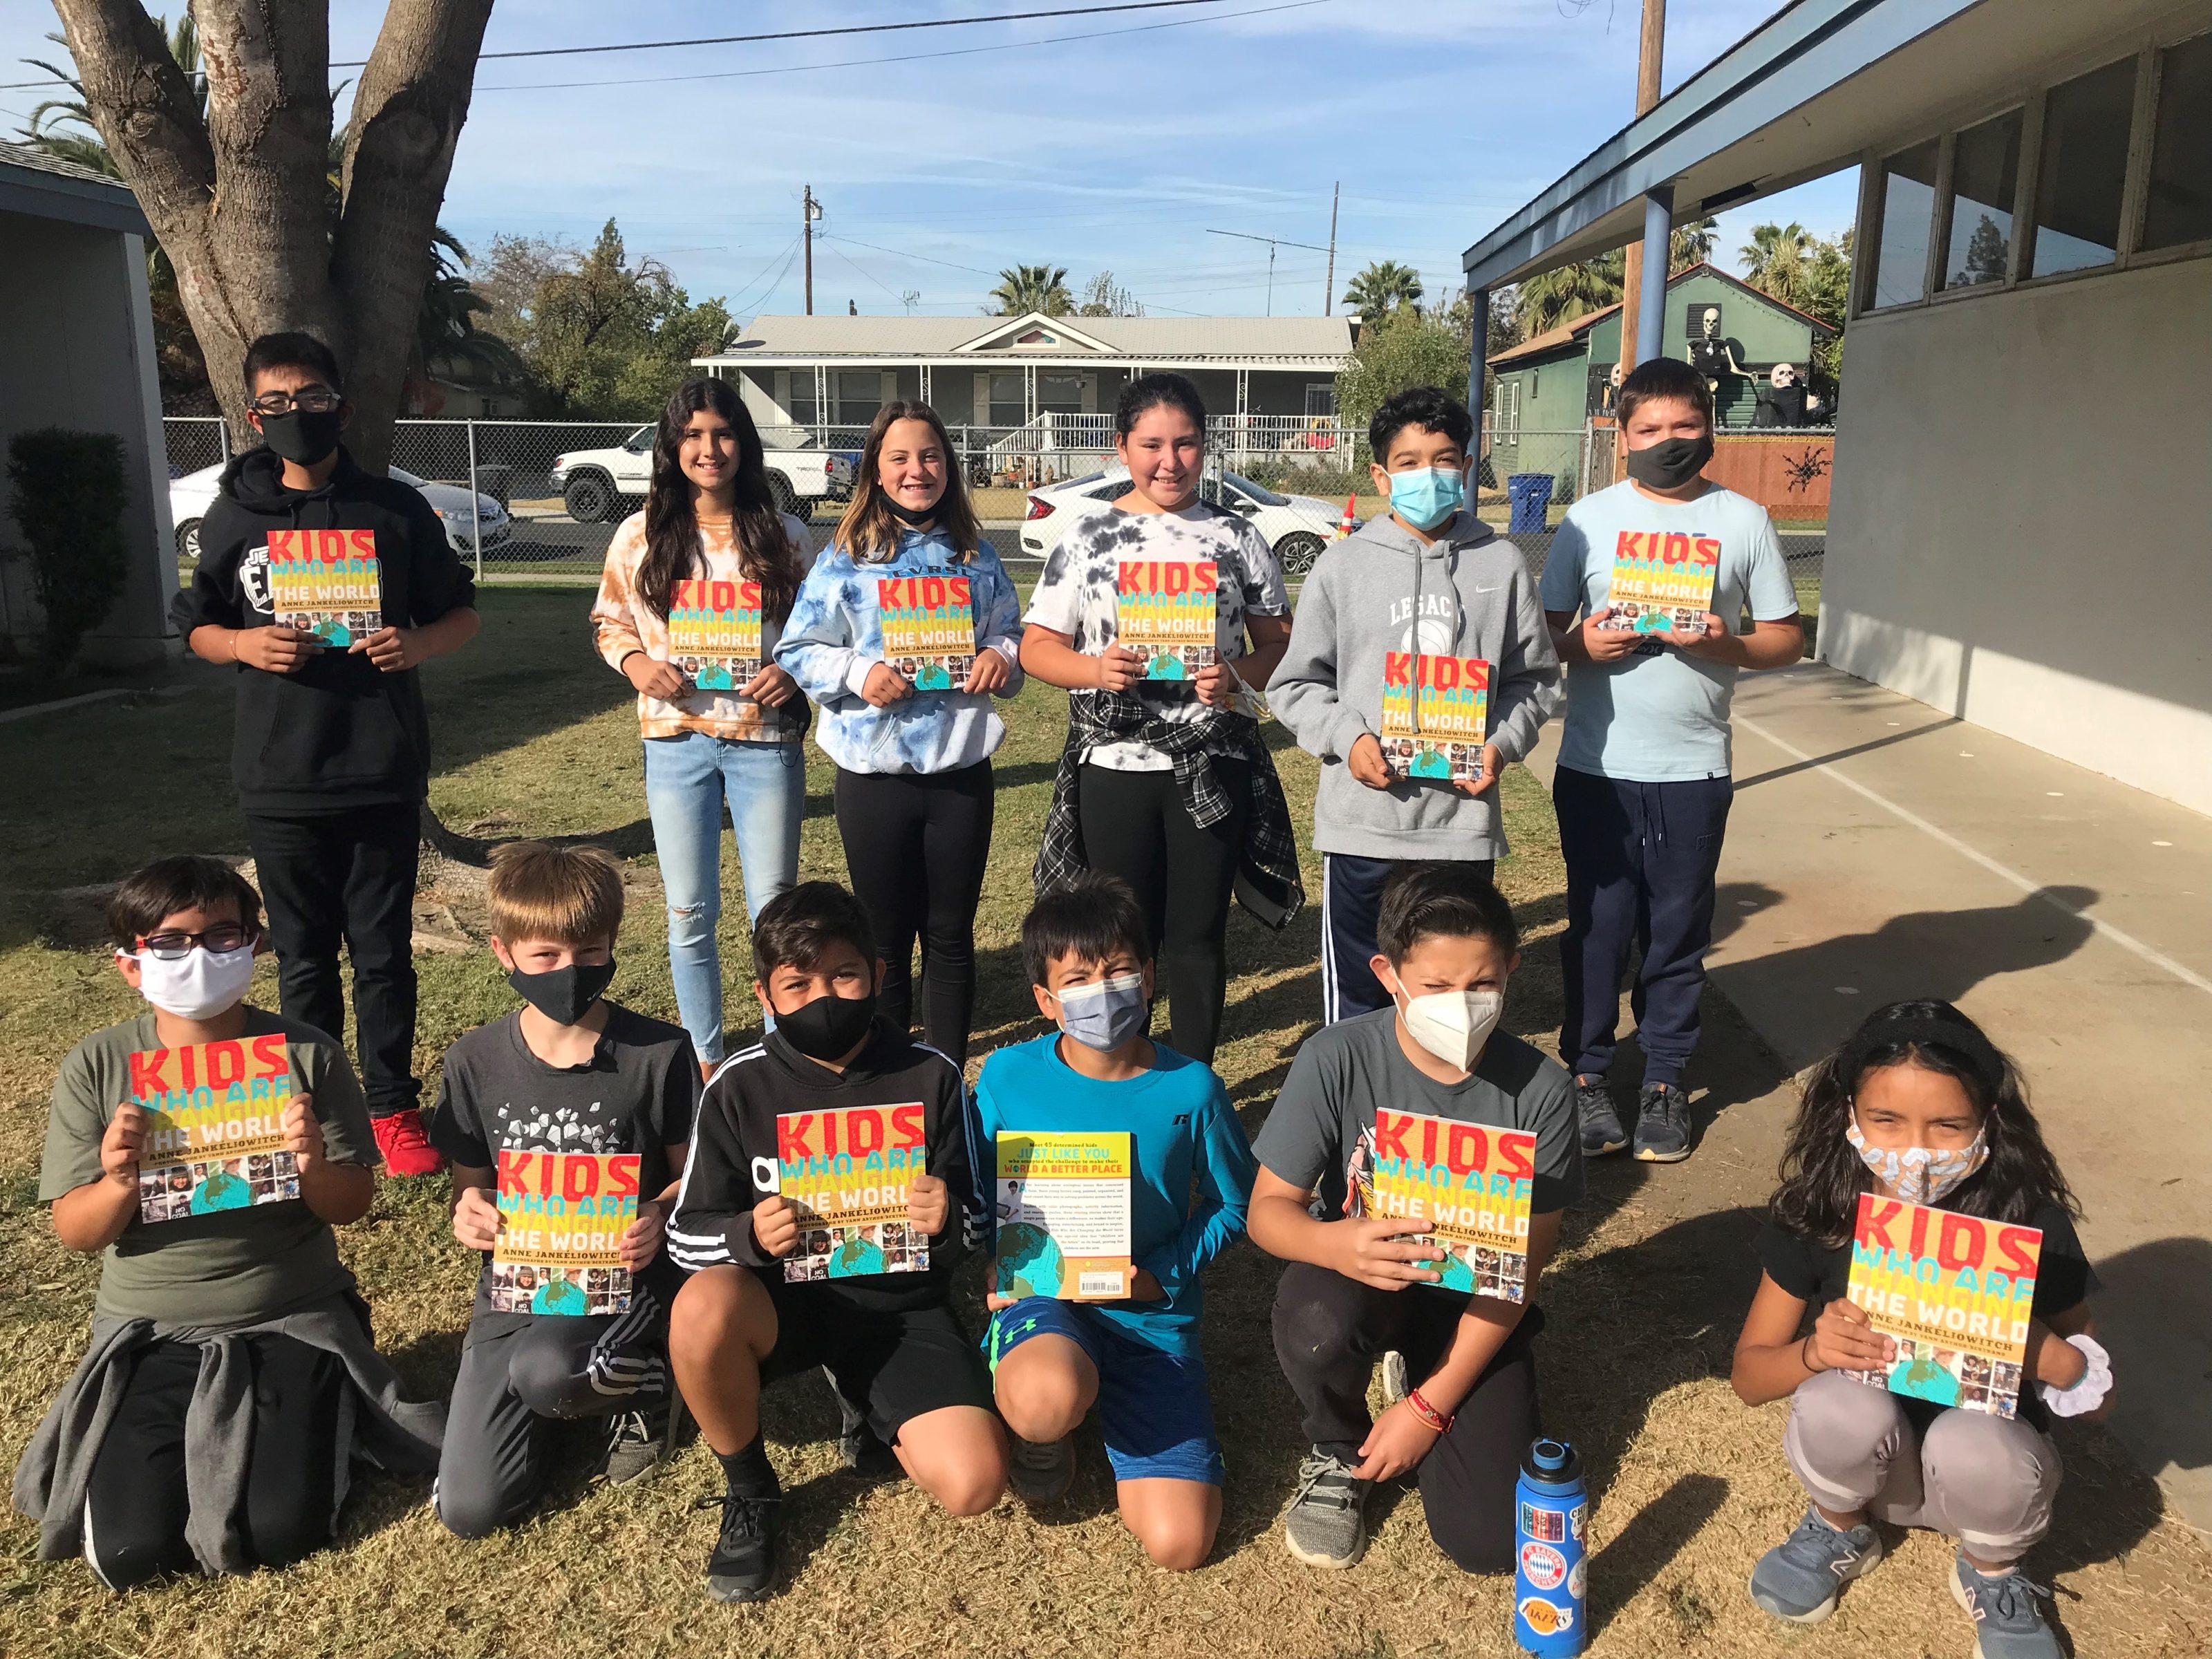 Group of students holding copies of the book "Kids Who Are Changing the World" 